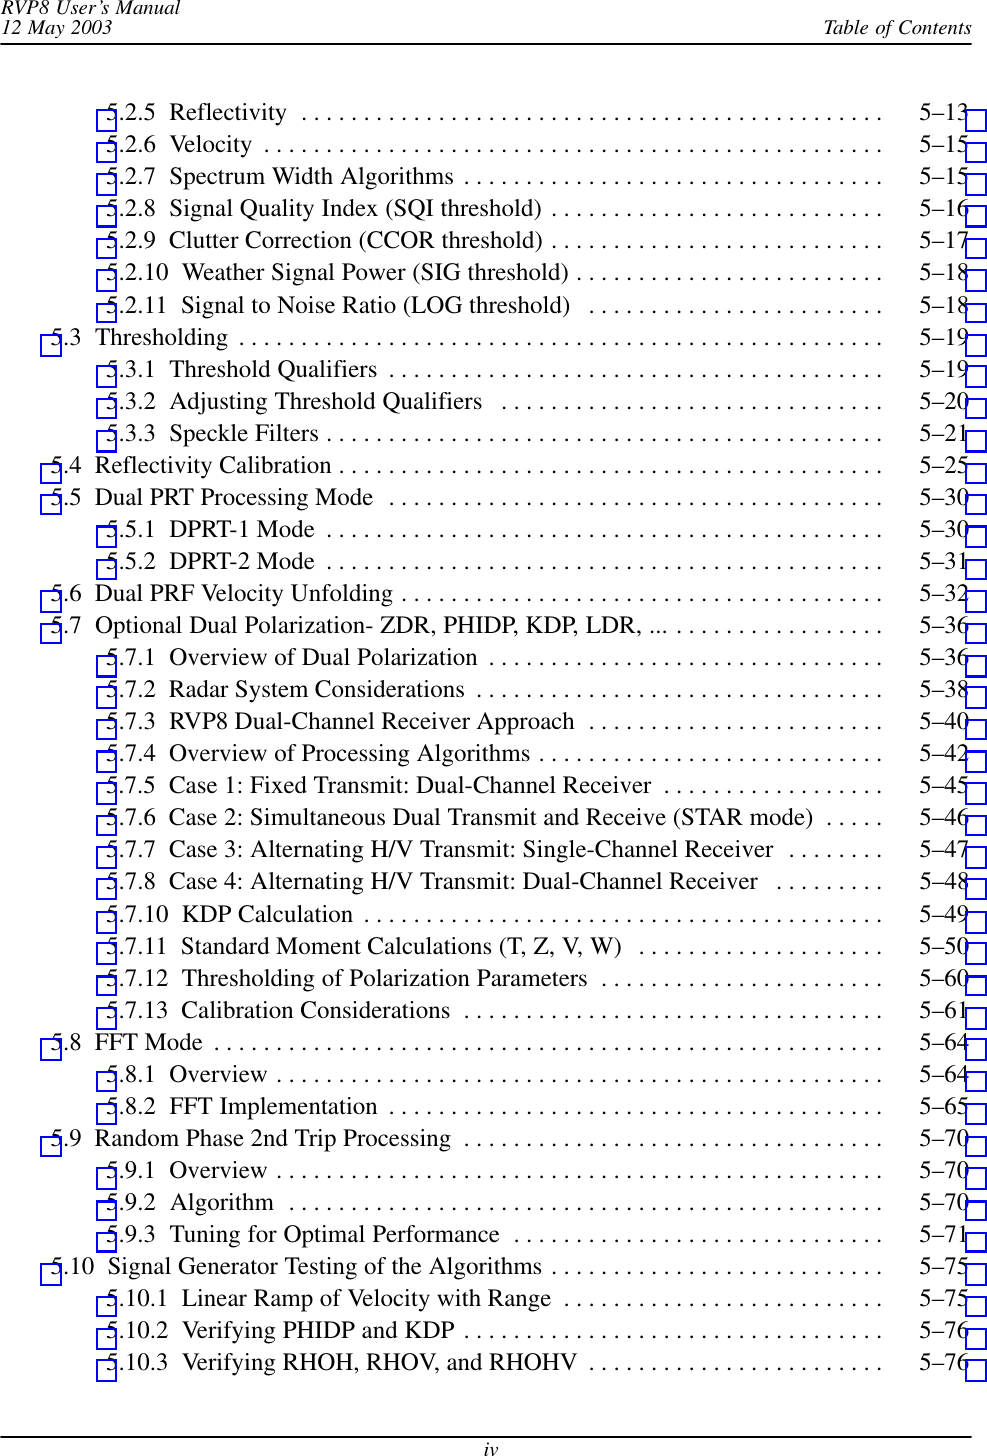 Table of ContentsRVP8 User’s Manual12 May 2003iv5.2.5  Reflectivity 5–13 . . . . . . . . . . . . . . . . . . . . . . . . . . . . . . . . . . . . . . . . . . . . . . . 5.2.6  Velocity 5–15 . . . . . . . . . . . . . . . . . . . . . . . . . . . . . . . . . . . . . . . . . . . . . . . . . . 5.2.7  Spectrum Width Algorithms 5–15 . . . . . . . . . . . . . . . . . . . . . . . . . . . . . . . . . . 5.2.8  Signal Quality Index (SQI threshold) 5–16 . . . . . . . . . . . . . . . . . . . . . . . . . . . 5.2.9  Clutter Correction (CCOR threshold) 5–17 . . . . . . . . . . . . . . . . . . . . . . . . . . . 5.2.10  Weather Signal Power (SIG threshold) 5–18 . . . . . . . . . . . . . . . . . . . . . . . . . 5.2.11  Signal to Noise Ratio (LOG threshold) 5–18 . . . . . . . . . . . . . . . . . . . . . . . . 5.3  Thresholding 5–19 . . . . . . . . . . . . . . . . . . . . . . . . . . . . . . . . . . . . . . . . . . . . . . . . . . . . 5.3.1  Threshold Qualifiers 5–19 . . . . . . . . . . . . . . . . . . . . . . . . . . . . . . . . . . . . . . . . 5.3.2  Adjusting Threshold Qualifiers 5–20 . . . . . . . . . . . . . . . . . . . . . . . . . . . . . . . 5.3.3  Speckle Filters 5–21 . . . . . . . . . . . . . . . . . . . . . . . . . . . . . . . . . . . . . . . . . . . . . 5.4  Reflectivity Calibration 5–25 . . . . . . . . . . . . . . . . . . . . . . . . . . . . . . . . . . . . . . . . . . . . 5.5  Dual PRT Processing Mode 5–30 . . . . . . . . . . . . . . . . . . . . . . . . . . . . . . . . . . . . . . . . 5.5.1  DPRT-1 Mode 5–30 . . . . . . . . . . . . . . . . . . . . . . . . . . . . . . . . . . . . . . . . . . . . . 5.5.2  DPRT-2 Mode 5–31 . . . . . . . . . . . . . . . . . . . . . . . . . . . . . . . . . . . . . . . . . . . . . 5.6  Dual PRF Velocity Unfolding 5–32 . . . . . . . . . . . . . . . . . . . . . . . . . . . . . . . . . . . . . . . 5.7  Optional Dual Polarization- ZDR, PHIDP, KDP, LDR, ... 5–36 . . . . . . . . . . . . . . . . . 5.7.1  Overview of Dual Polarization 5–36 . . . . . . . . . . . . . . . . . . . . . . . . . . . . . . . . 5.7.2  Radar System Considerations 5–38 . . . . . . . . . . . . . . . . . . . . . . . . . . . . . . . . . 5.7.3  RVP8 Dual-Channel Receiver Approach 5–40 . . . . . . . . . . . . . . . . . . . . . . . . 5.7.4  Overview of Processing Algorithms 5–42 . . . . . . . . . . . . . . . . . . . . . . . . . . . . 5.7.5  Case 1: Fixed Transmit: Dual-Channel Receiver 5–45 . . . . . . . . . . . . . . . . . . 5.7.6  Case 2: Simultaneous Dual Transmit and Receive (STAR mode) 5–46 . . . . . 5.7.7  Case 3: Alternating H/V Transmit: Single-Channel Receiver 5–47 . . . . . . . . 5.7.8  Case 4: Alternating H/V Transmit: Dual-Channel Receiver 5–48 . . . . . . . . . 5.7.10  KDP Calculation 5–49 . . . . . . . . . . . . . . . . . . . . . . . . . . . . . . . . . . . . . . . . . . 5.7.11  Standard Moment Calculations (T, Z, V, W) 5–50 . . . . . . . . . . . . . . . . . . . . 5.7.12  Thresholding of Polarization Parameters 5–60 . . . . . . . . . . . . . . . . . . . . . . . 5.7.13  Calibration Considerations 5–61 . . . . . . . . . . . . . . . . . . . . . . . . . . . . . . . . . . 5.8  FFT Mode 5–64 . . . . . . . . . . . . . . . . . . . . . . . . . . . . . . . . . . . . . . . . . . . . . . . . . . . . . . 5.8.1  Overview 5–64 . . . . . . . . . . . . . . . . . . . . . . . . . . . . . . . . . . . . . . . . . . . . . . . . . 5.8.2  FFT Implementation 5–65 . . . . . . . . . . . . . . . . . . . . . . . . . . . . . . . . . . . . . . . . 5.9  Random Phase 2nd Trip Processing 5–70 . . . . . . . . . . . . . . . . . . . . . . . . . . . . . . . . . . 5.9.1  Overview 5–70 . . . . . . . . . . . . . . . . . . . . . . . . . . . . . . . . . . . . . . . . . . . . . . . . . 5.9.2  Algorithm 5–70 . . . . . . . . . . . . . . . . . . . . . . . . . . . . . . . . . . . . . . . . . . . . . . . . 5.9.3  Tuning for Optimal Performance 5–71 . . . . . . . . . . . . . . . . . . . . . . . . . . . . . . 5.10  Signal Generator Testing of the Algorithms 5–75 . . . . . . . . . . . . . . . . . . . . . . . . . . . 5.10.1  Linear Ramp of Velocity with Range 5–75 . . . . . . . . . . . . . . . . . . . . . . . . . . 5.10.2  Verifying PHIDP and KDP 5–76 . . . . . . . . . . . . . . . . . . . . . . . . . . . . . . . . . . 5.10.3  Verifying RHOH, RHOV, and RHOHV 5–76 . . . . . . . . . . . . . . . . . . . . . . . . 